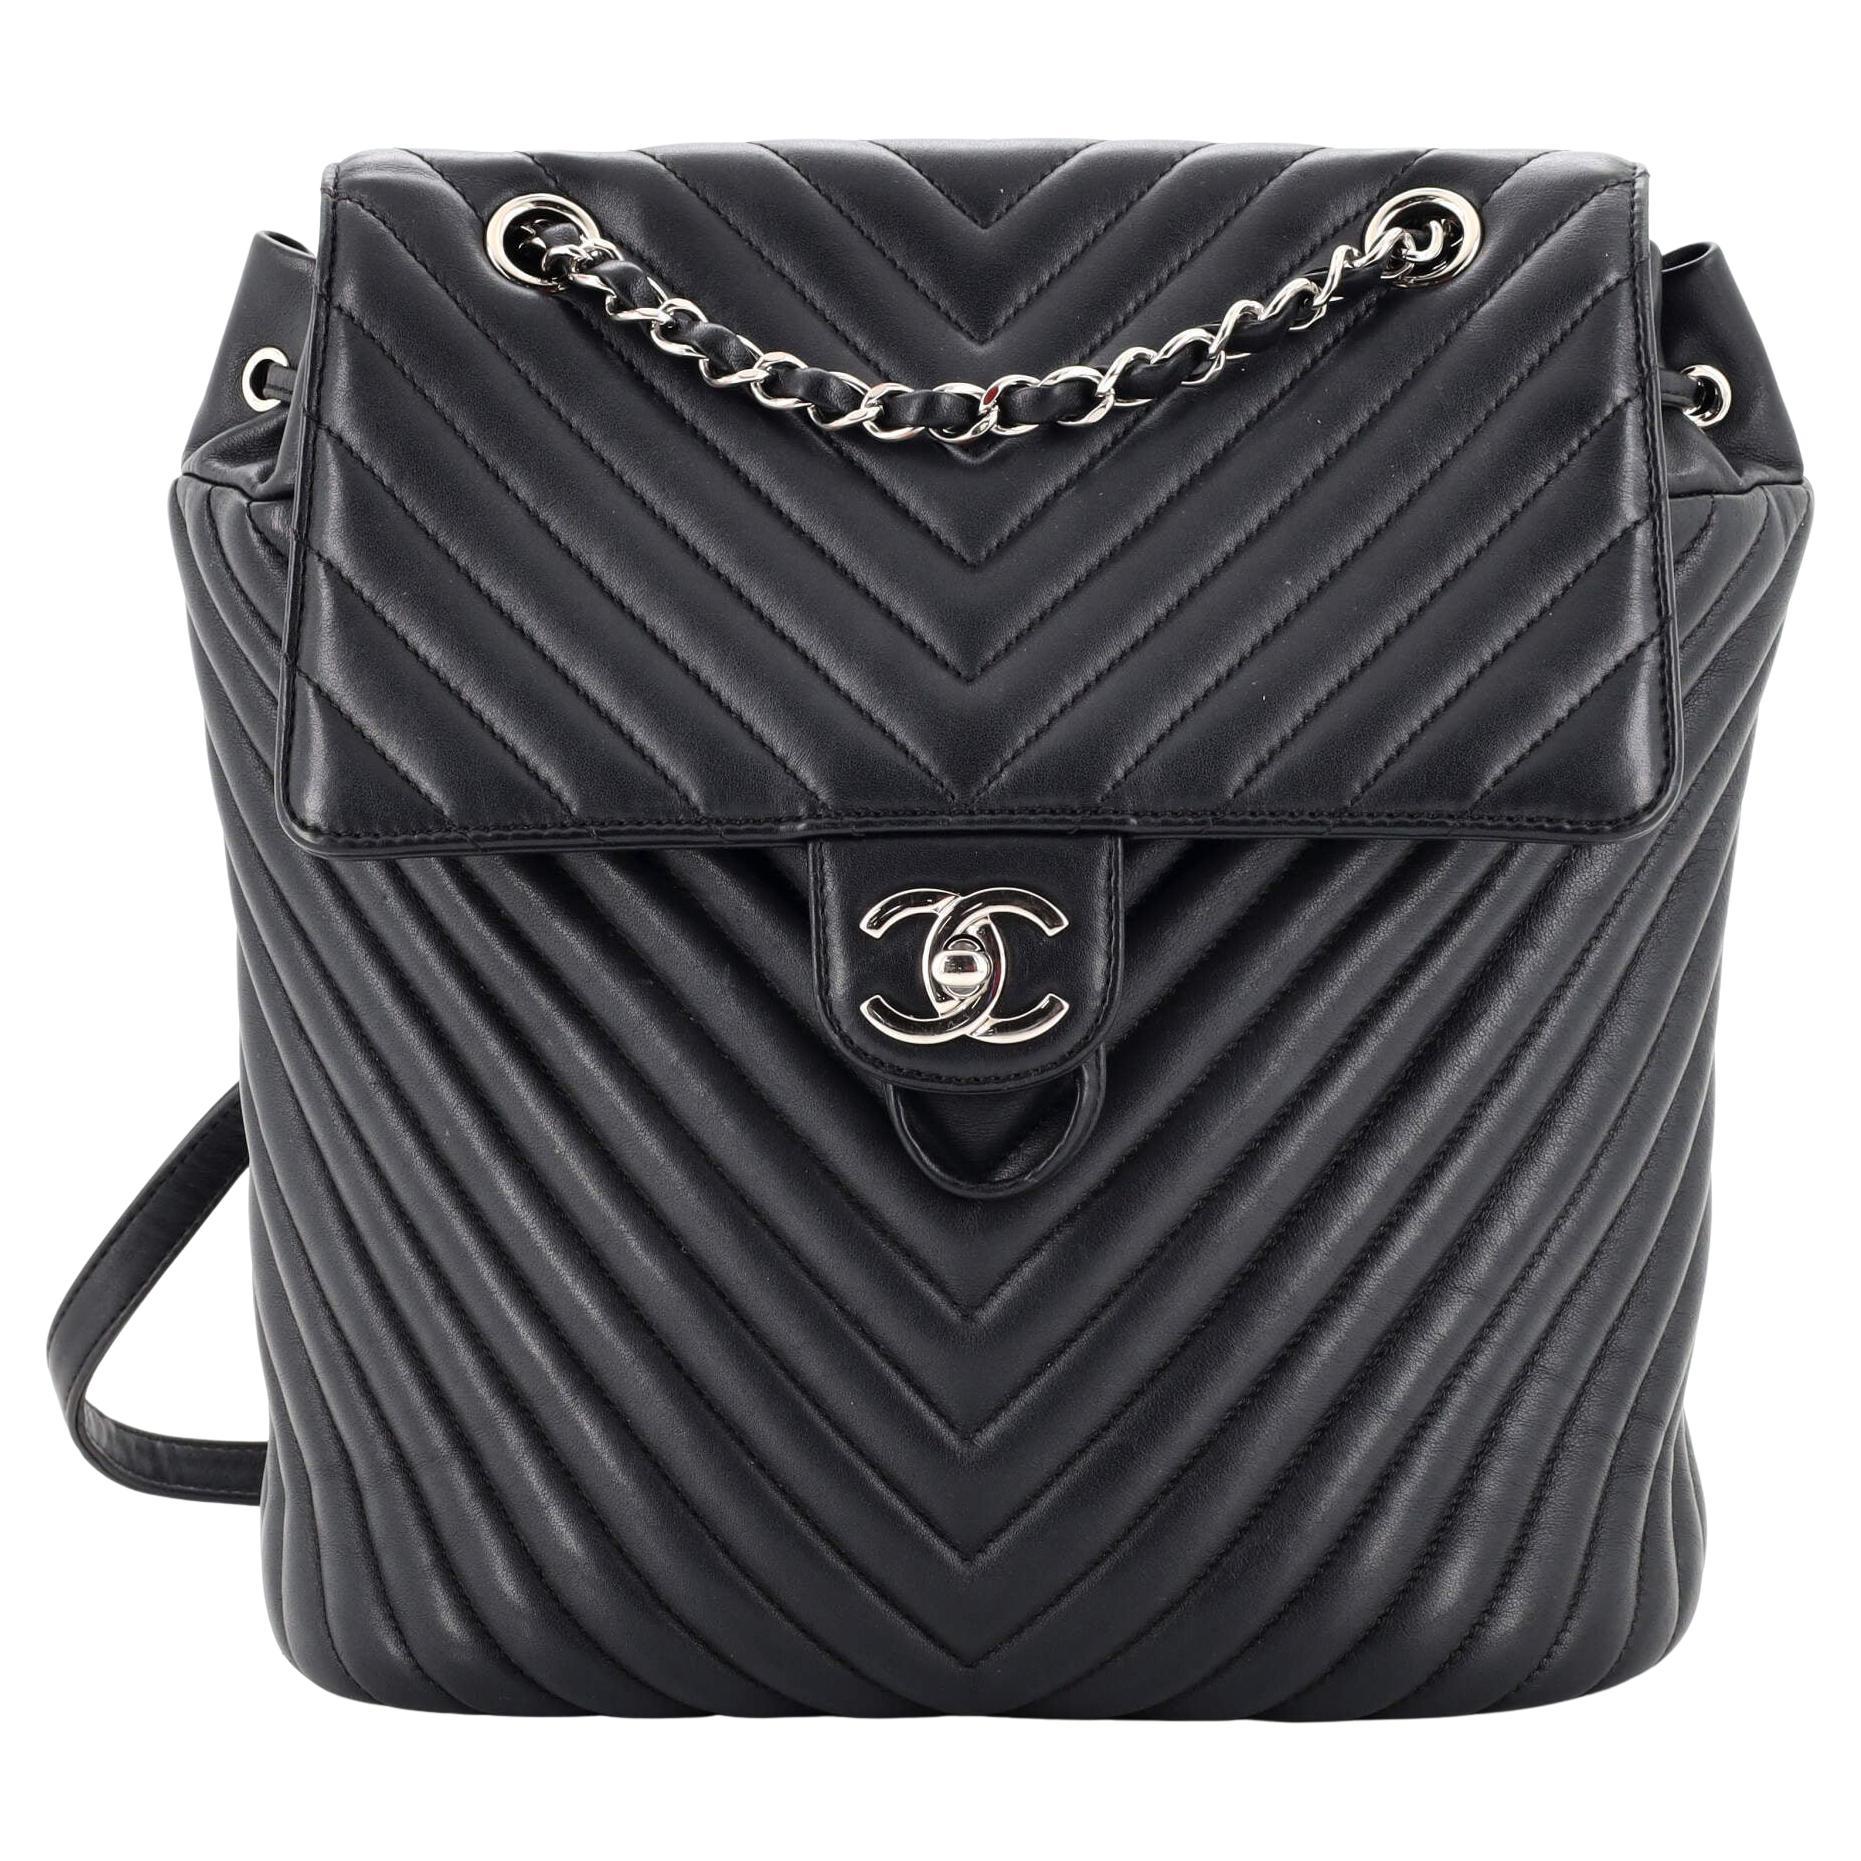 Urban spirit leather backpack Chanel Black in Leather - 16426470